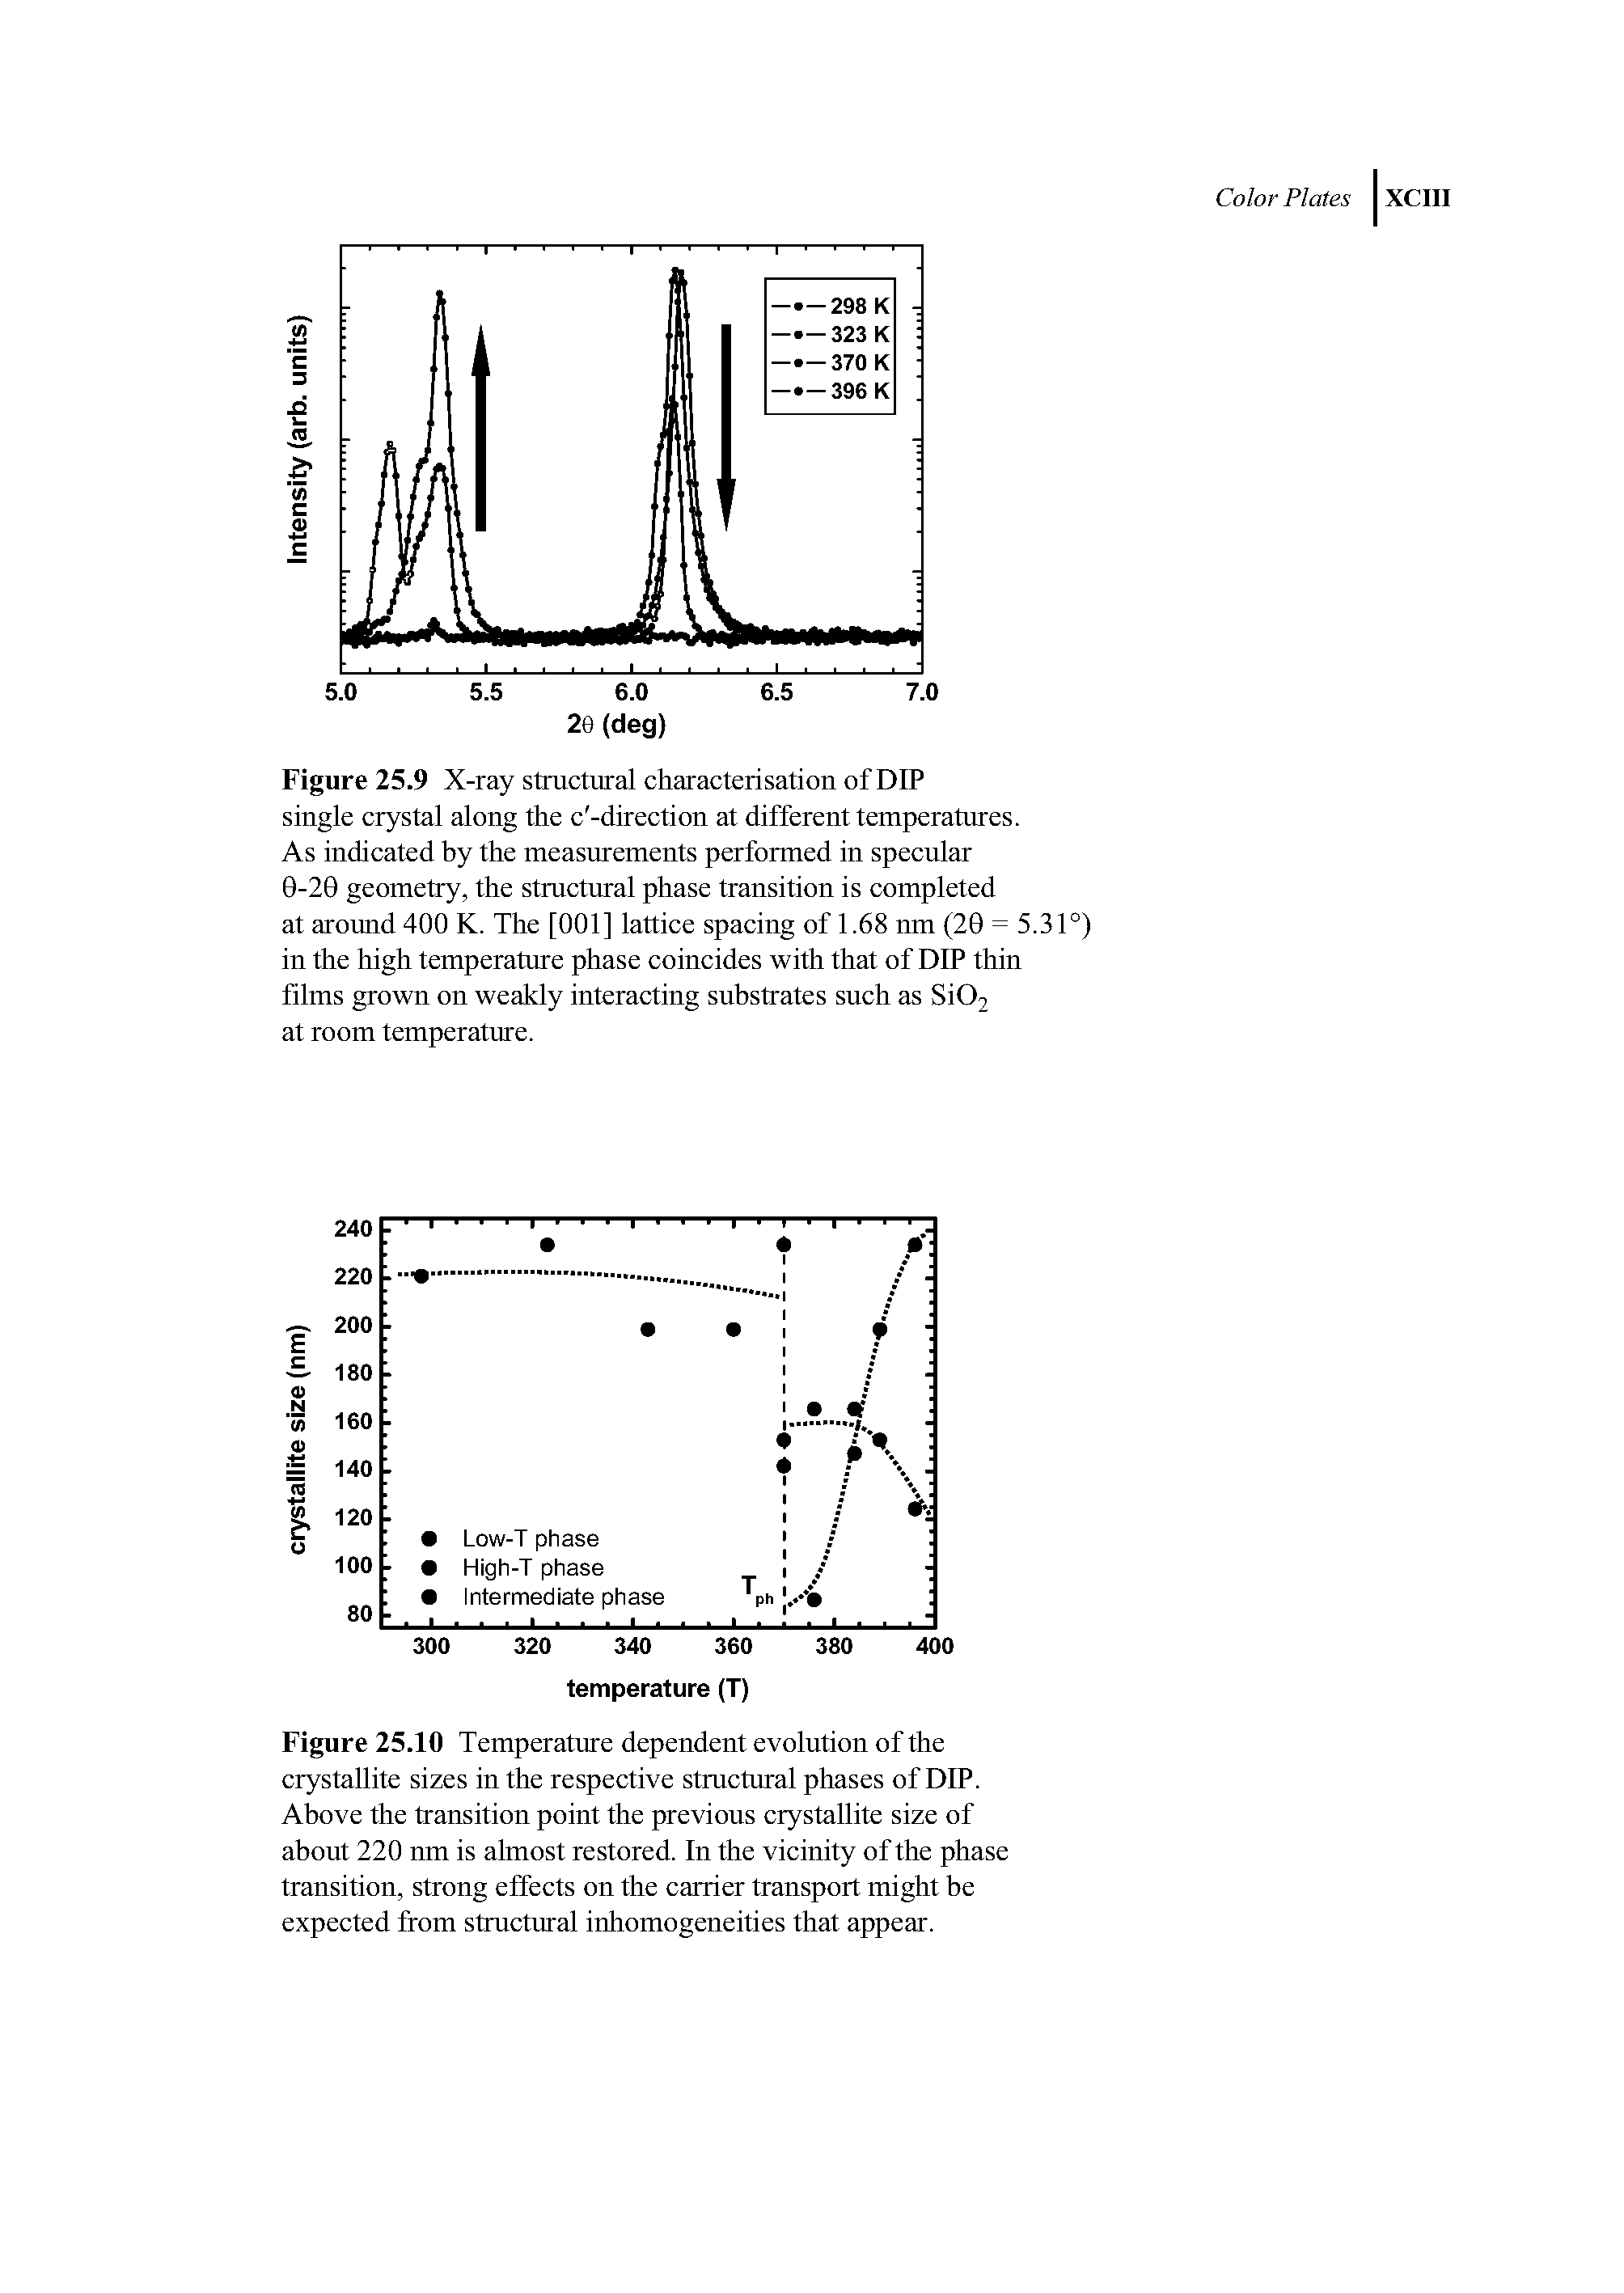 Figure 25.10 Temperature dependent evolution of the crystallite sizes in the respective structural phases of DIP. Above the transition point the previous crystallite size of about 220 nm is almost restored. In the vicinity of the phase transition, strong effects on the carrier transport might be expected from structural inhomogeneities that appear.